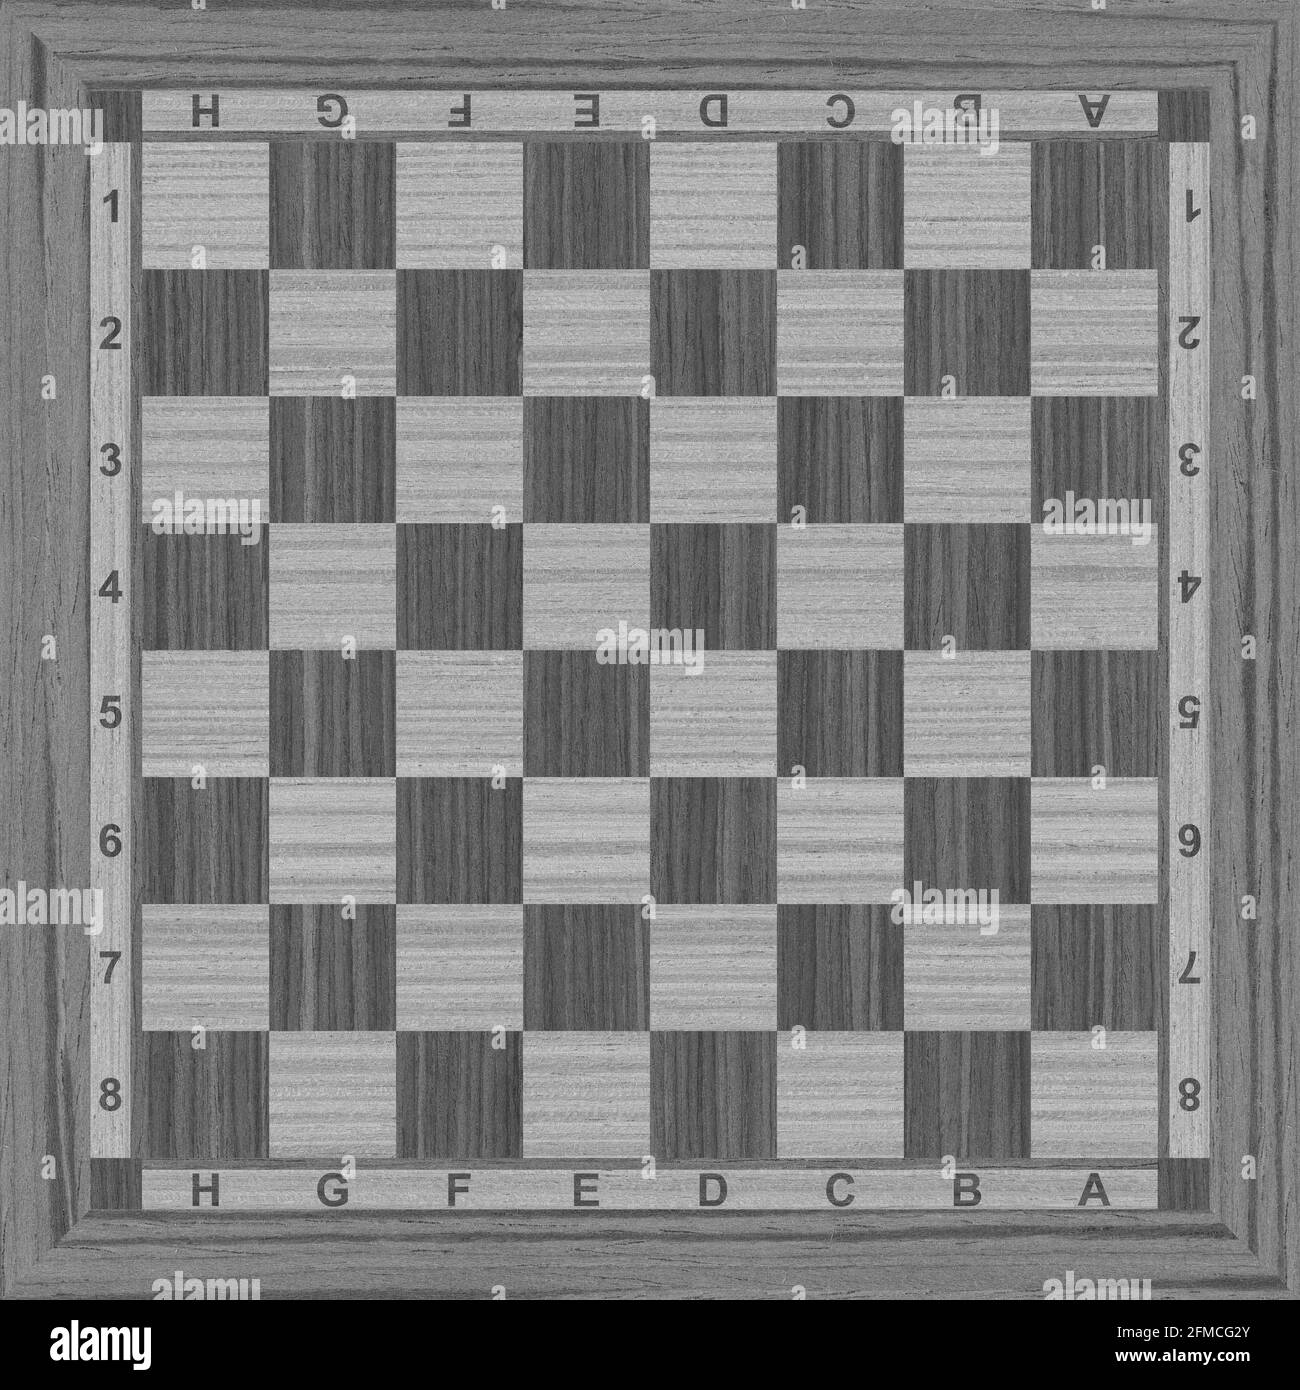 Top view of empty wooden chess board surface, chess game, mind game Stock Photo